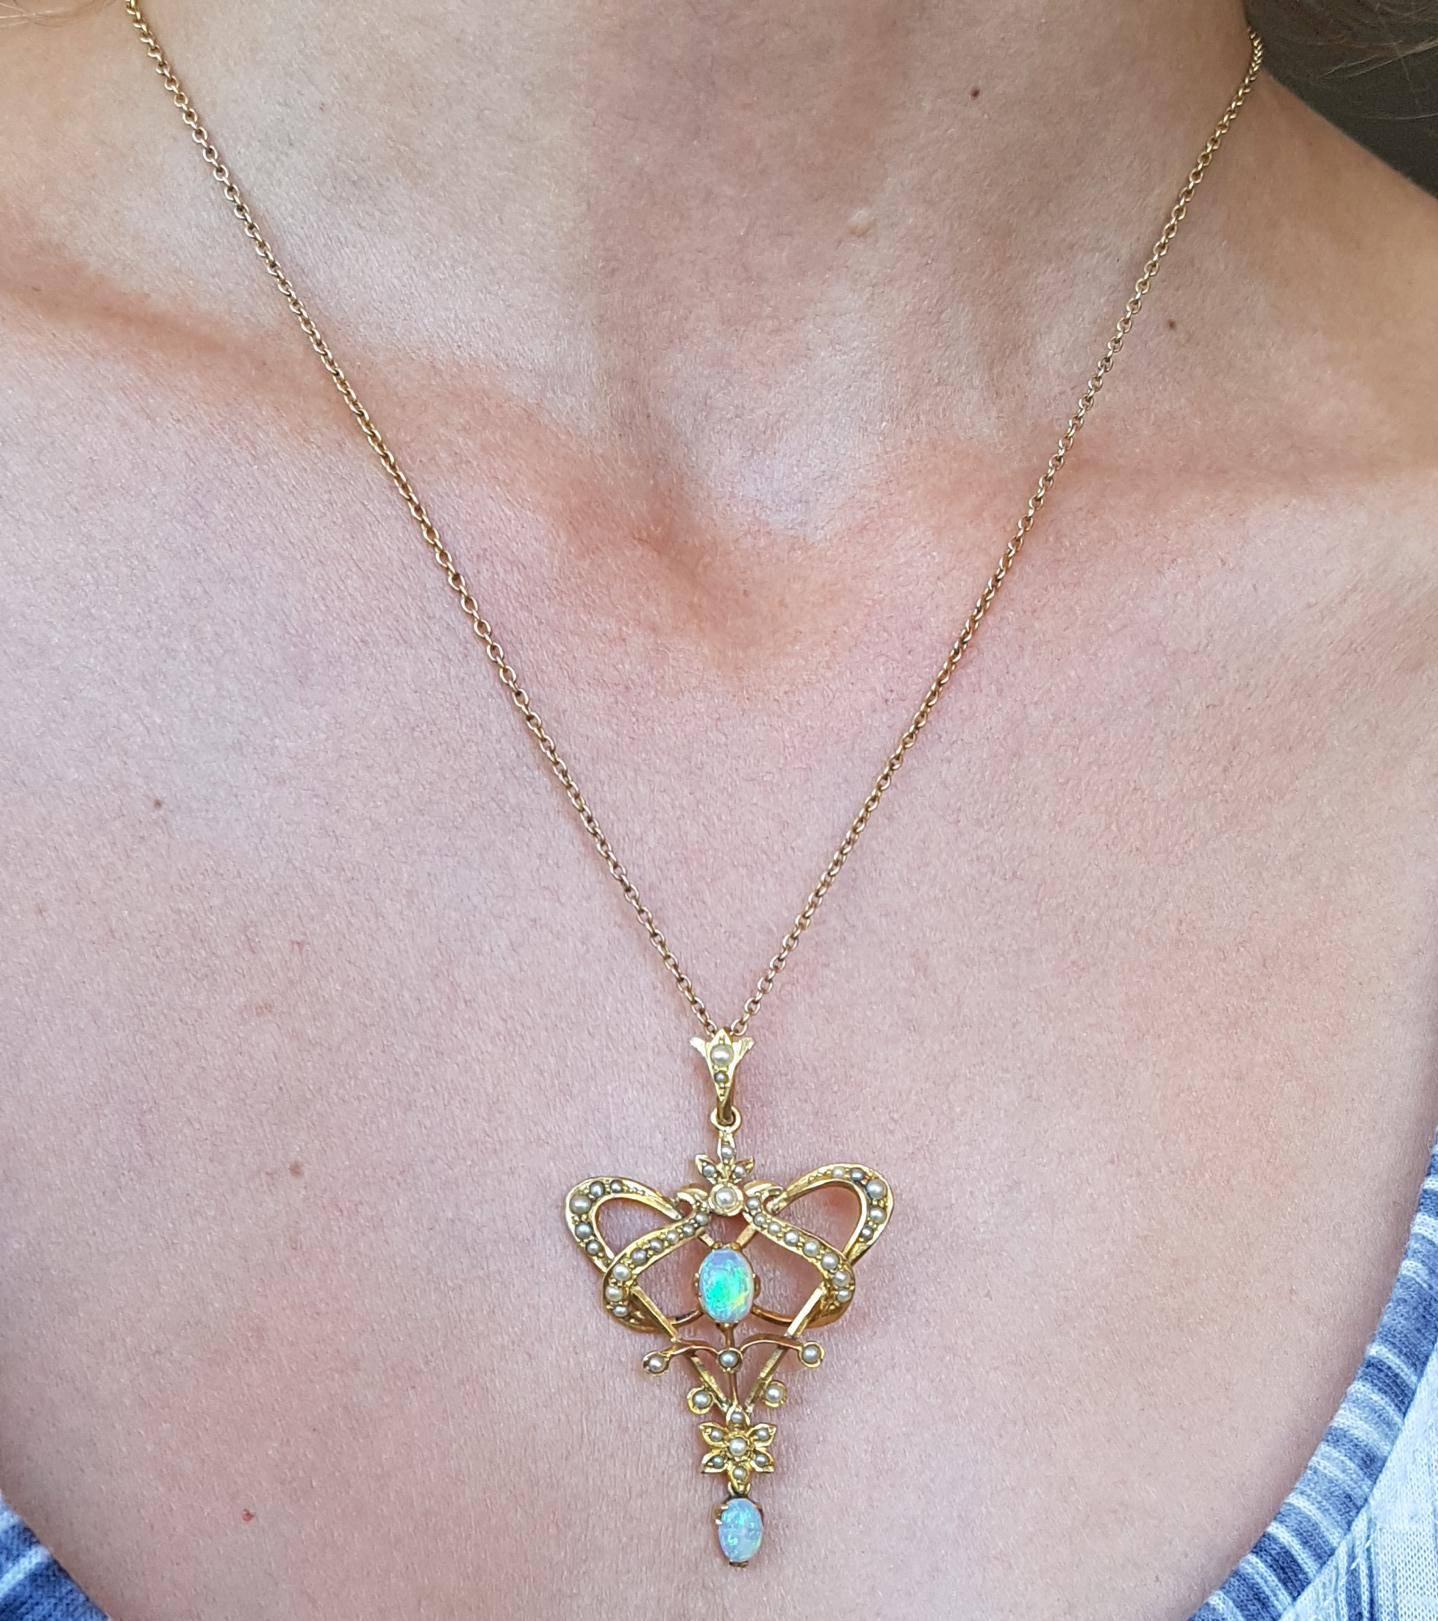 Edwardian Art Nouveau Gold Opal Seed Pearl Pendant Necklace  In Excellent Condition For Sale In Perth, AU